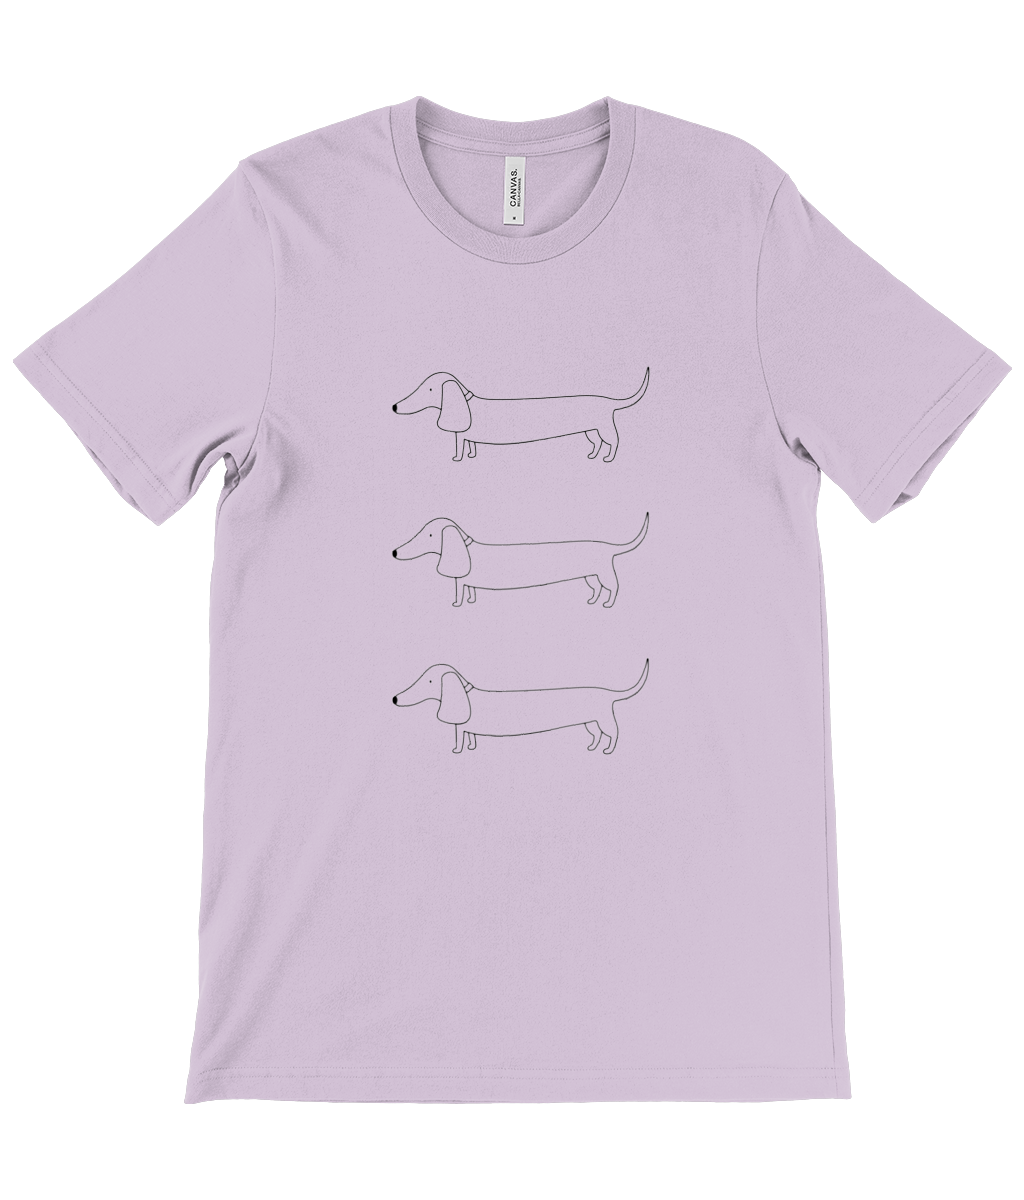 Lilac unisex t-shirt. Design on front shows 3 outline drawings of sausage dogs, in a column one above the other.